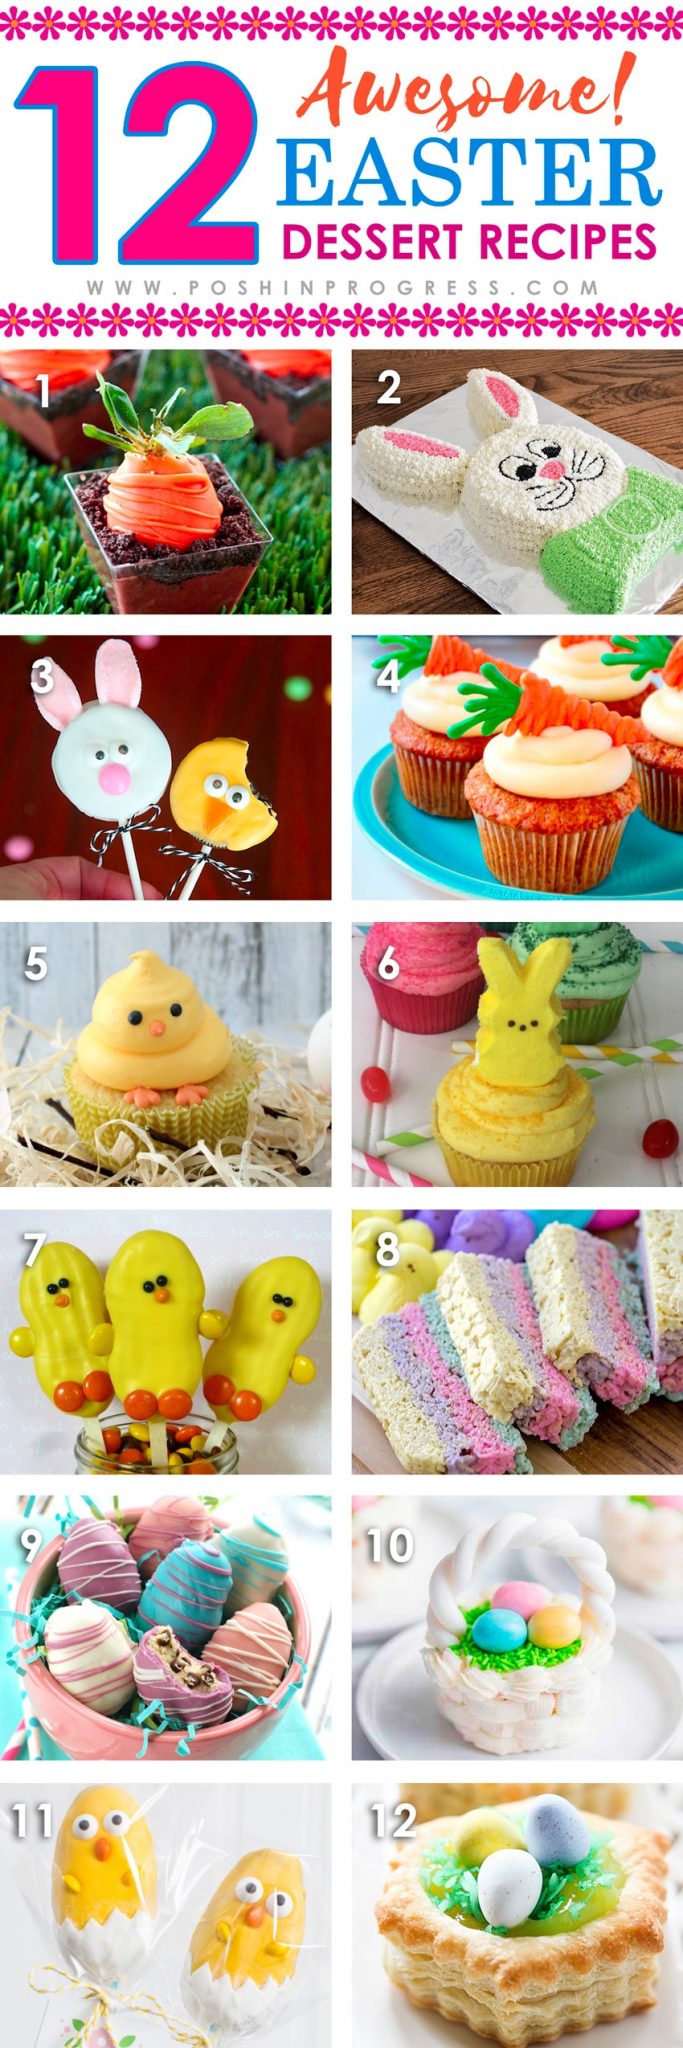 12 Awesome Easter Desserts Recipes You Can Whip Up Easily